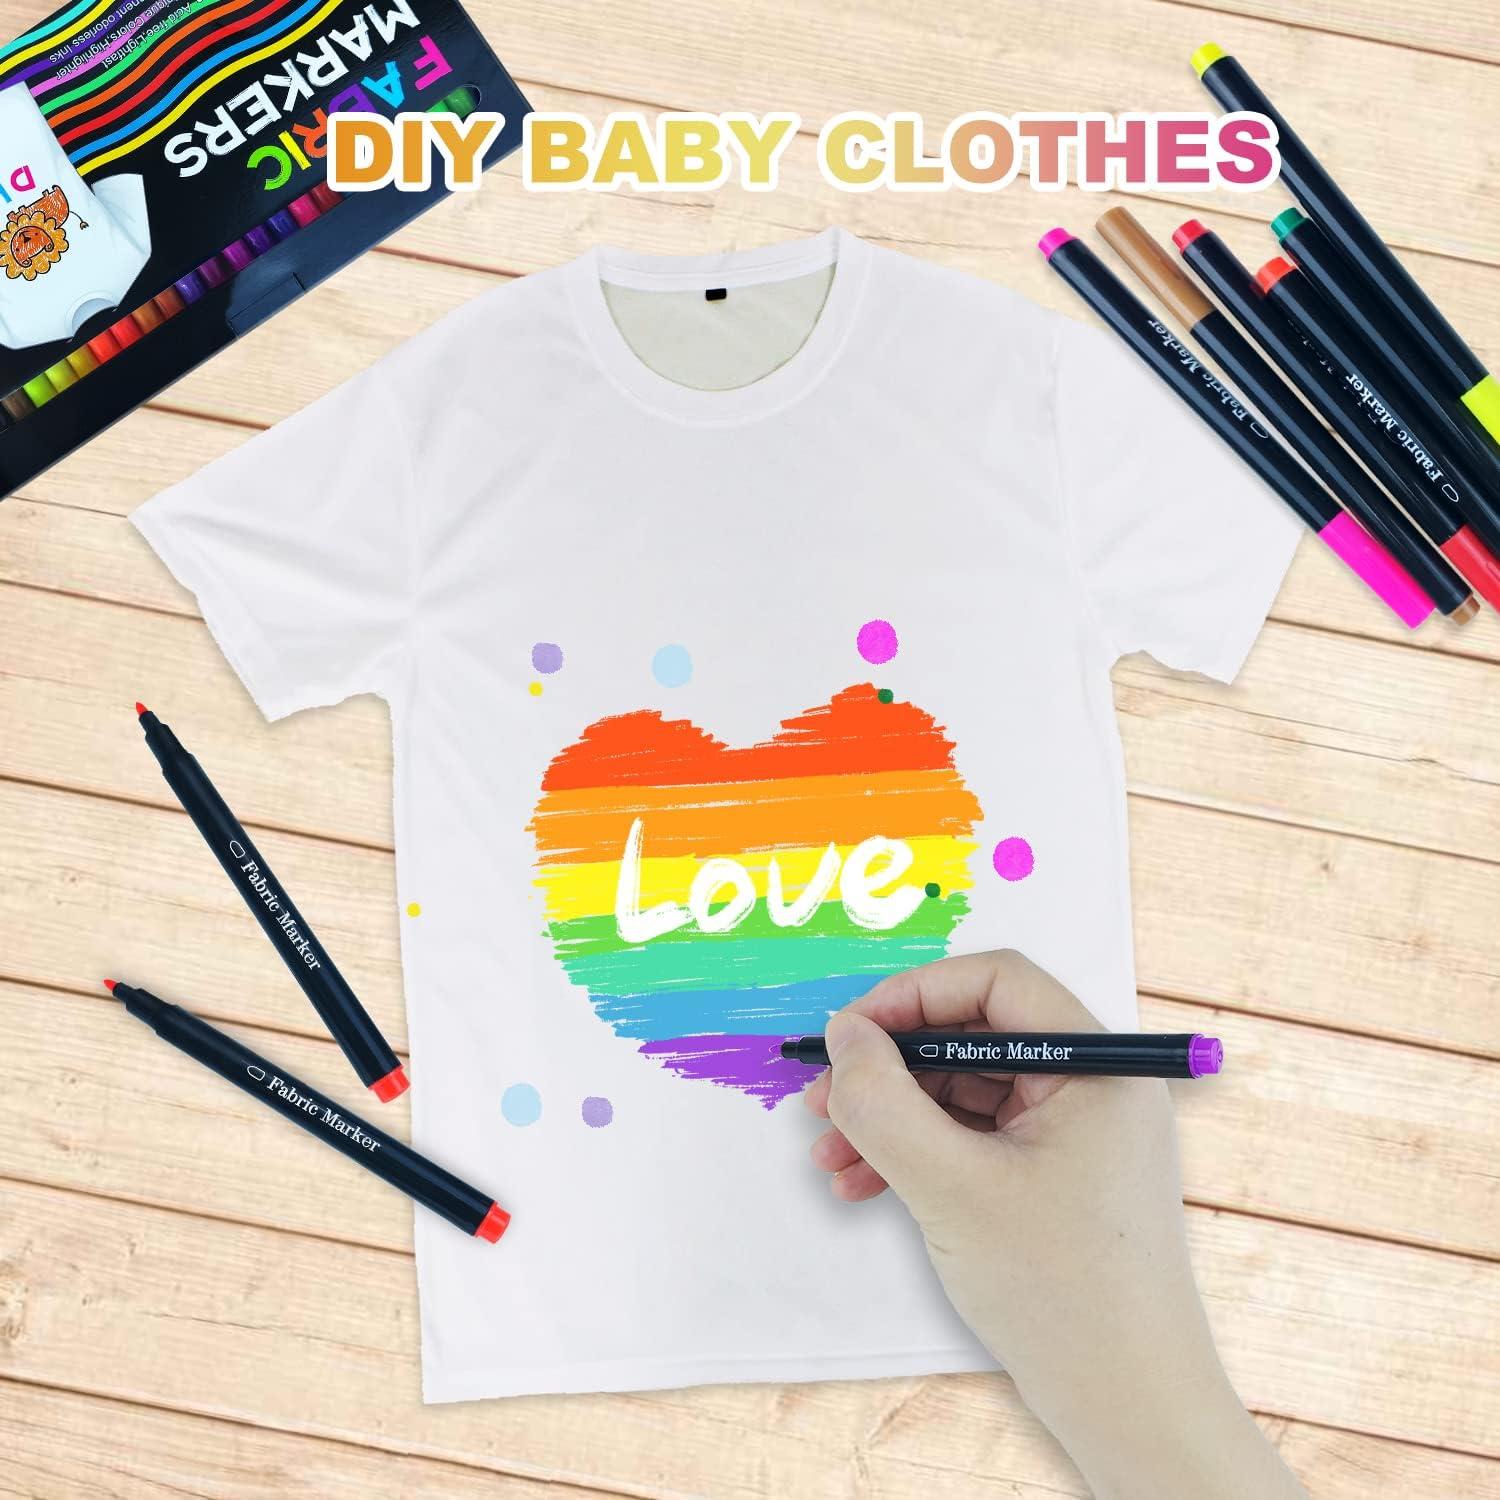 12pc/set Colorful Fabric Painting Marker Permanent Fabric DIY Design Pens  For T-shirt Clothes Children School Painting Tool - AliExpress